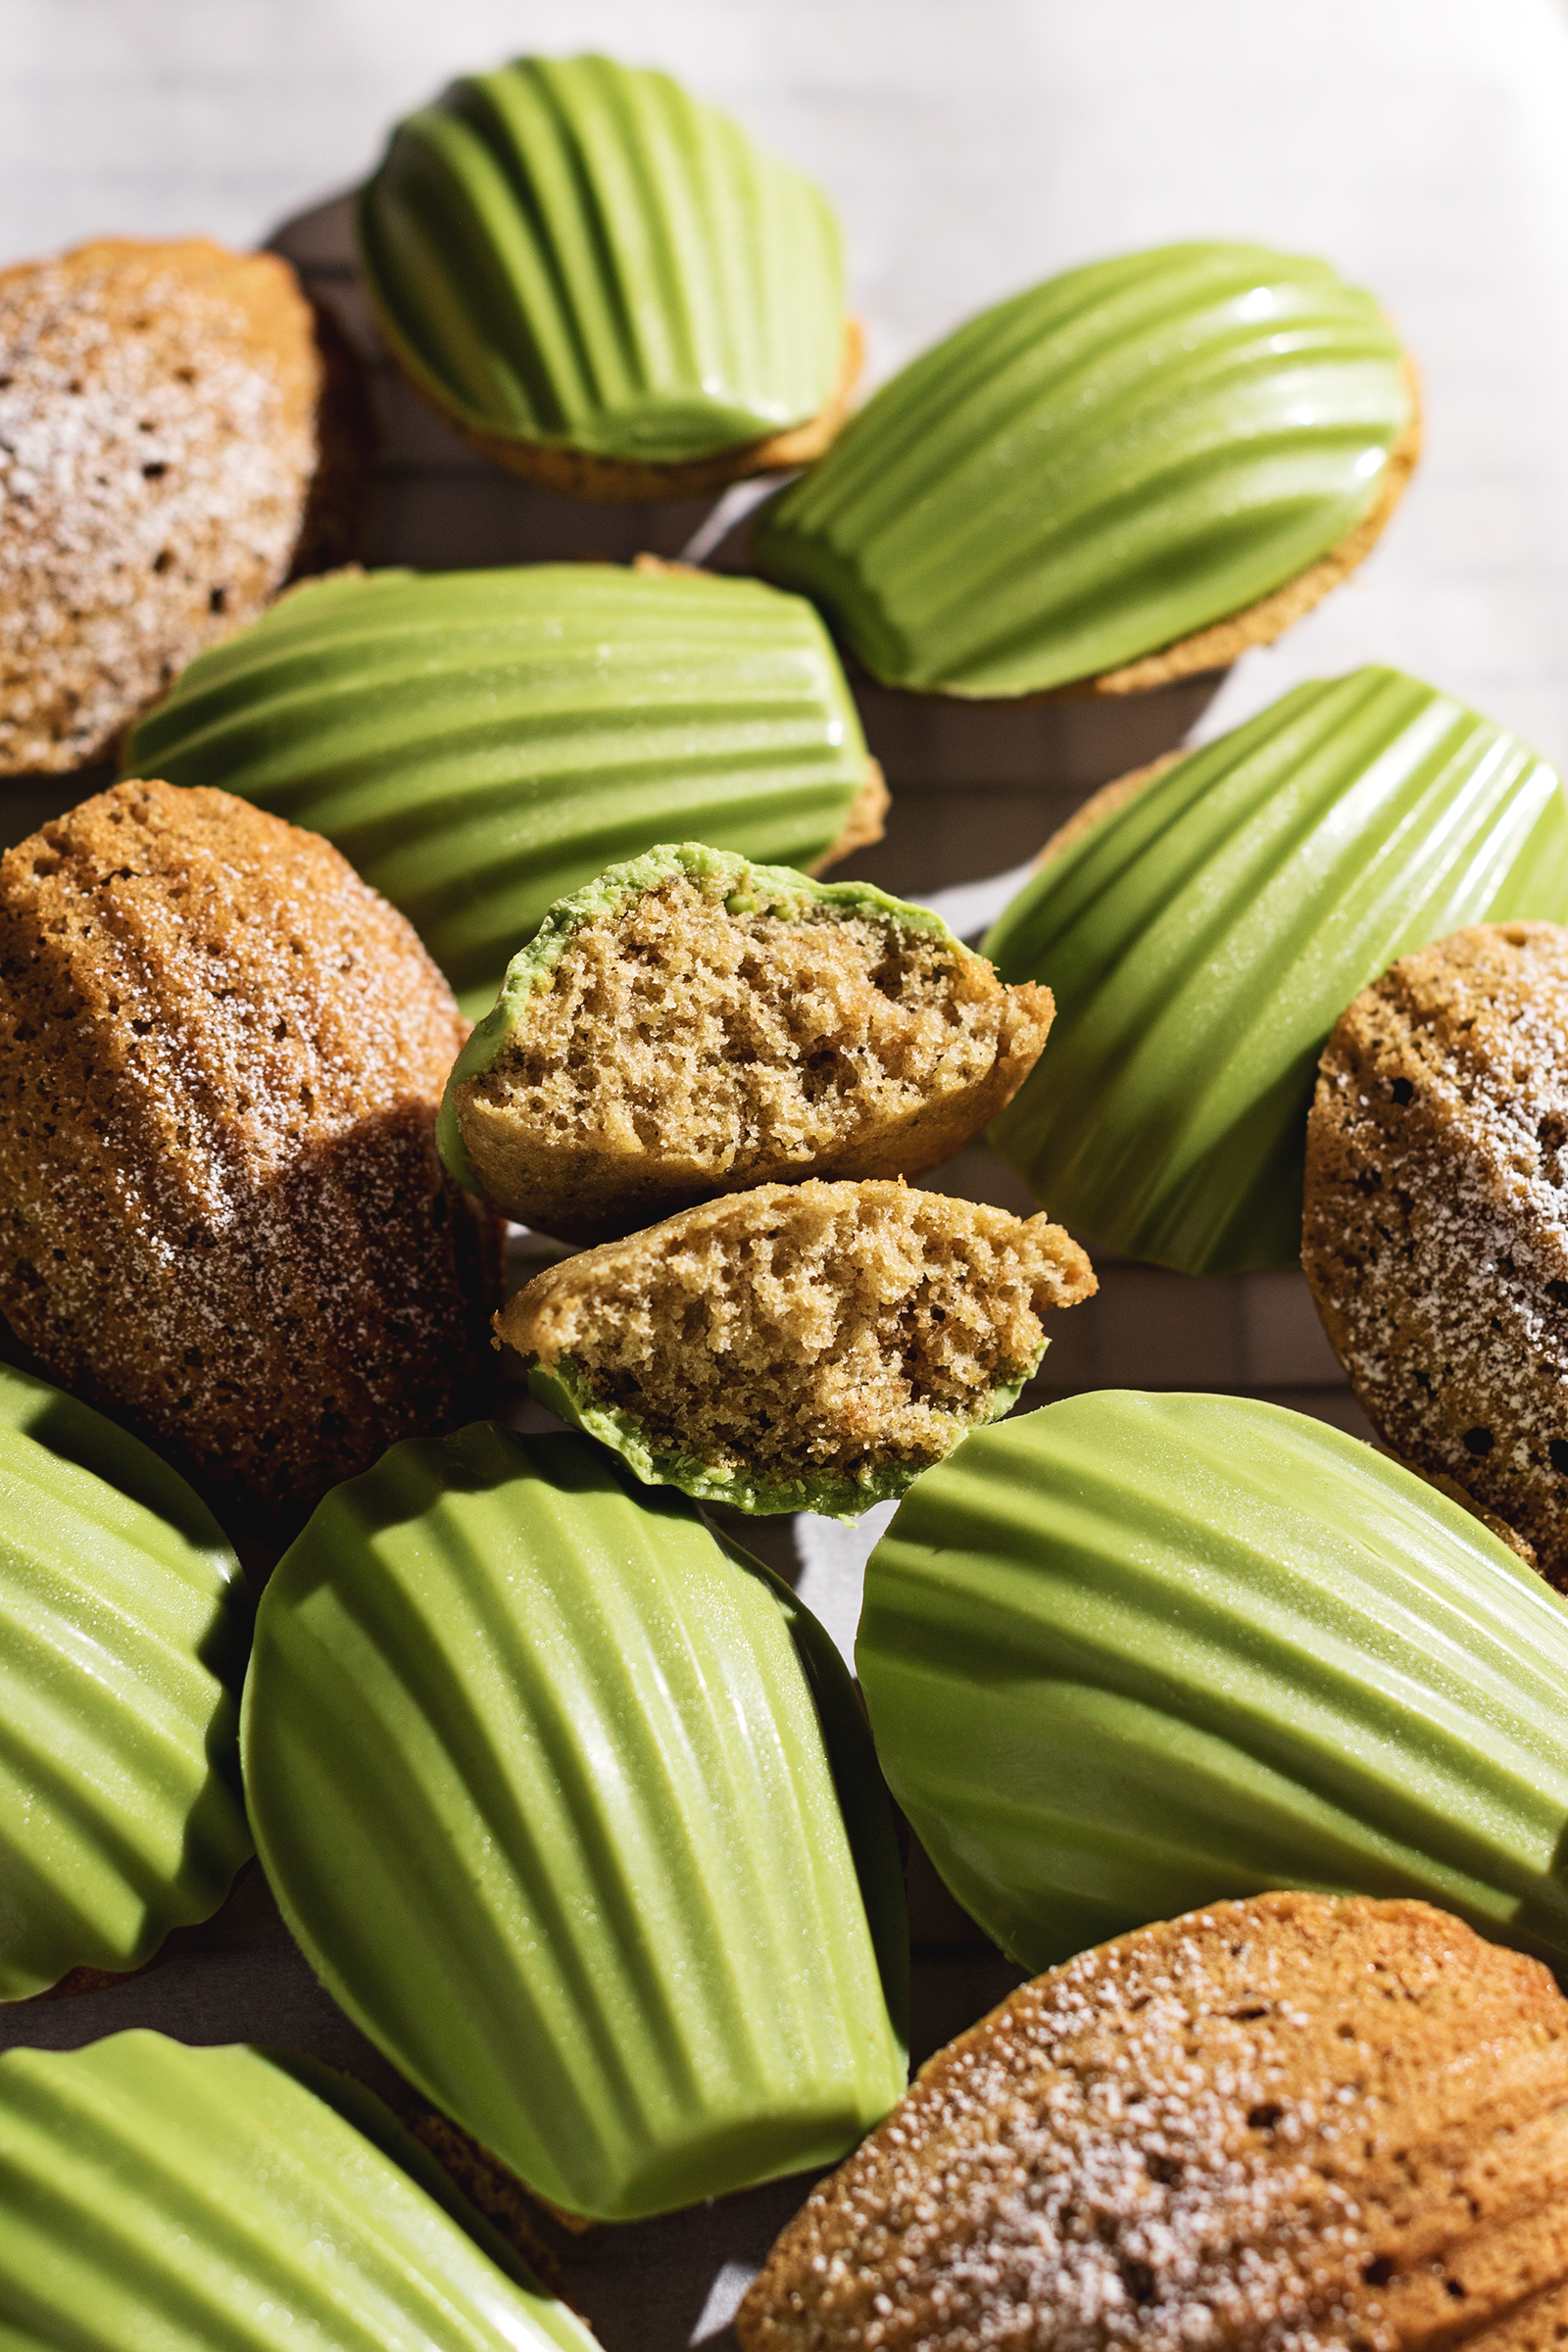 A matcha madeleine cut in half to show the fluffy texture inside.